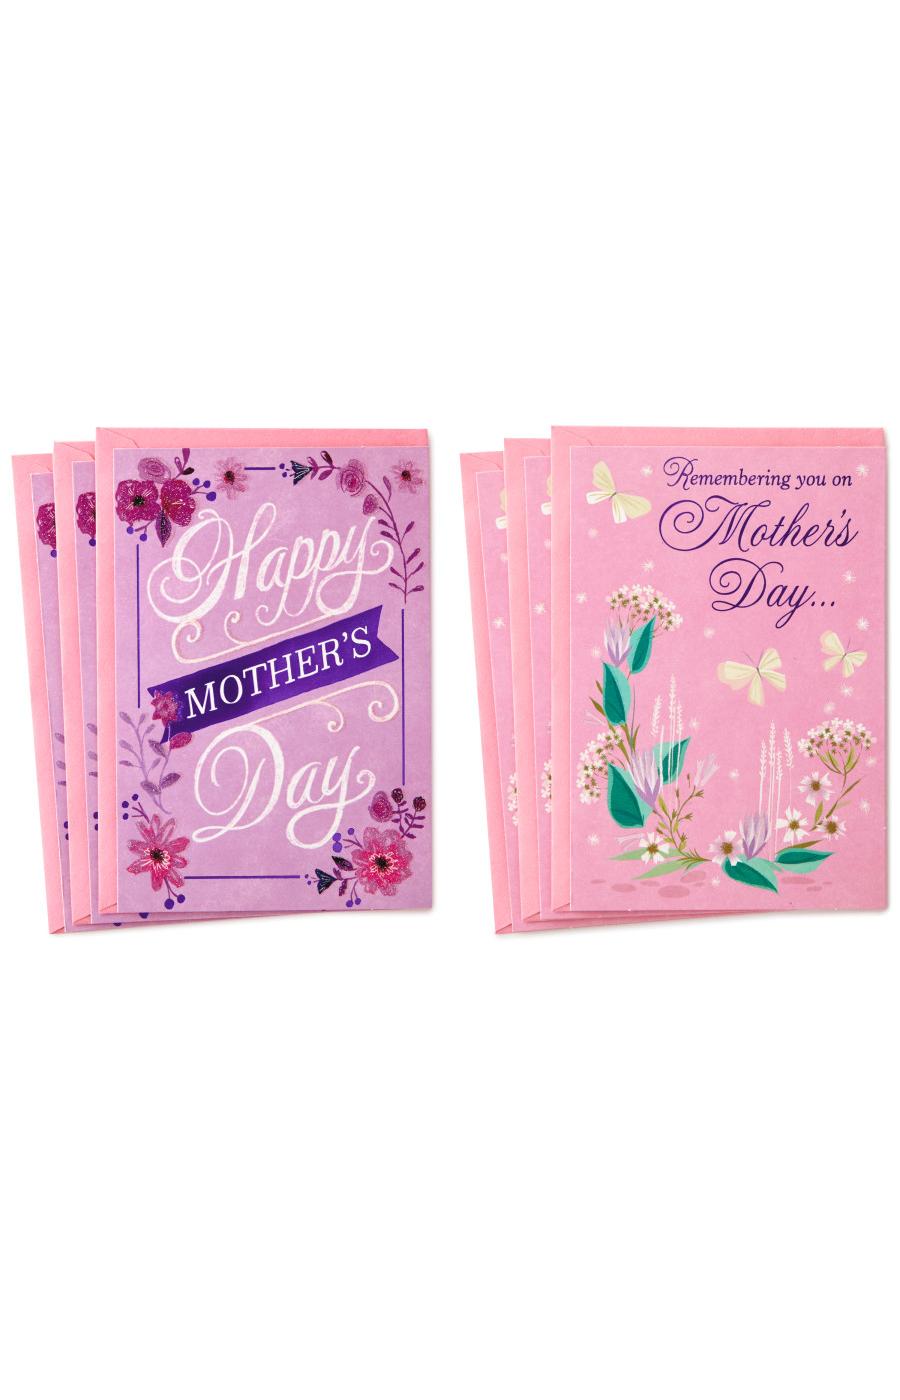 Hallmark Remembering You Assorted Mother's Day Cards with Envelopes - S6, S3; image 1 of 7